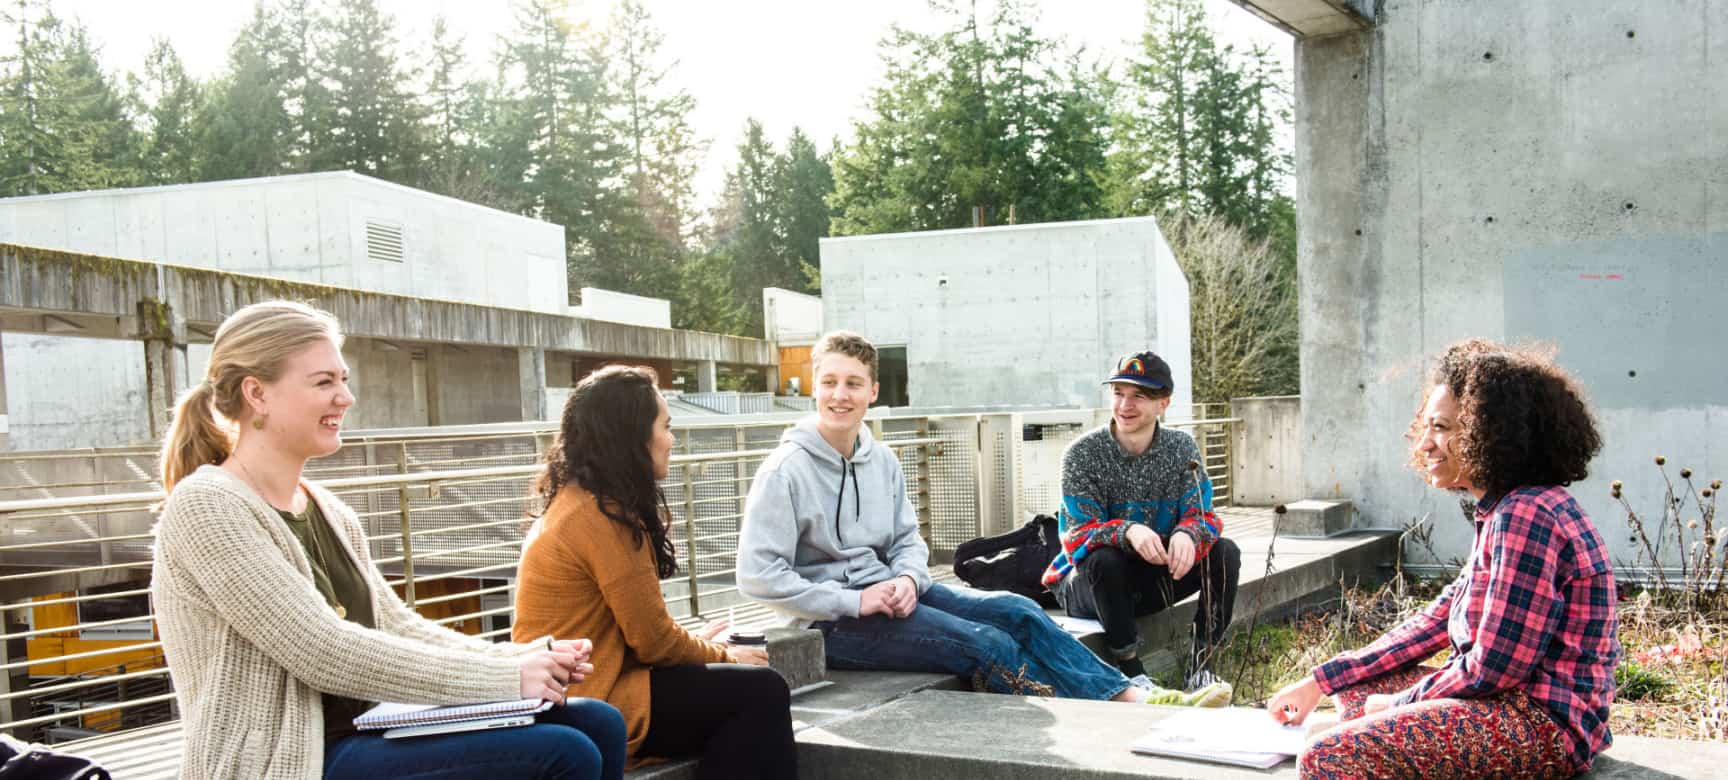 Five students of different races and backgrounds, 2 male and 3 female, sit outside on an overgrown loading dock laughing and discussing topics. Trees and industrial buildings are visible in the background.